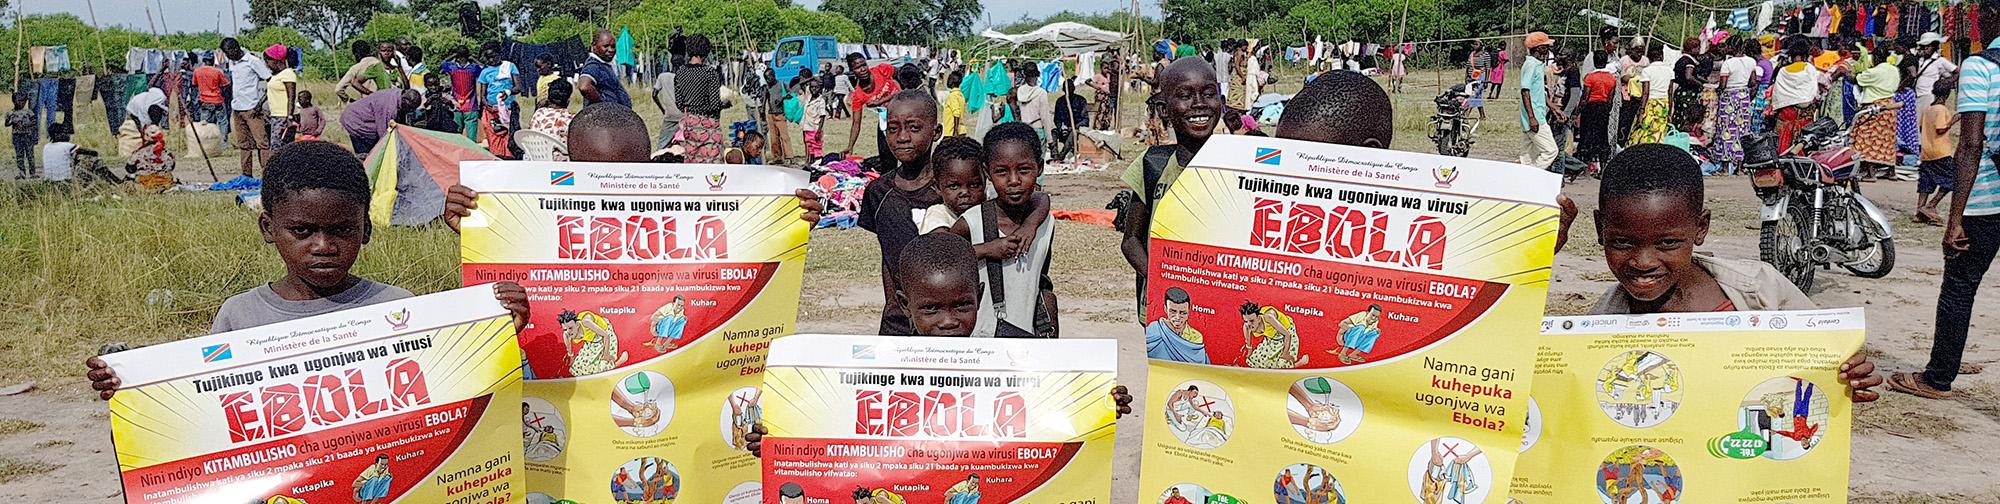 Children holding educative posters about Ebola in their hands